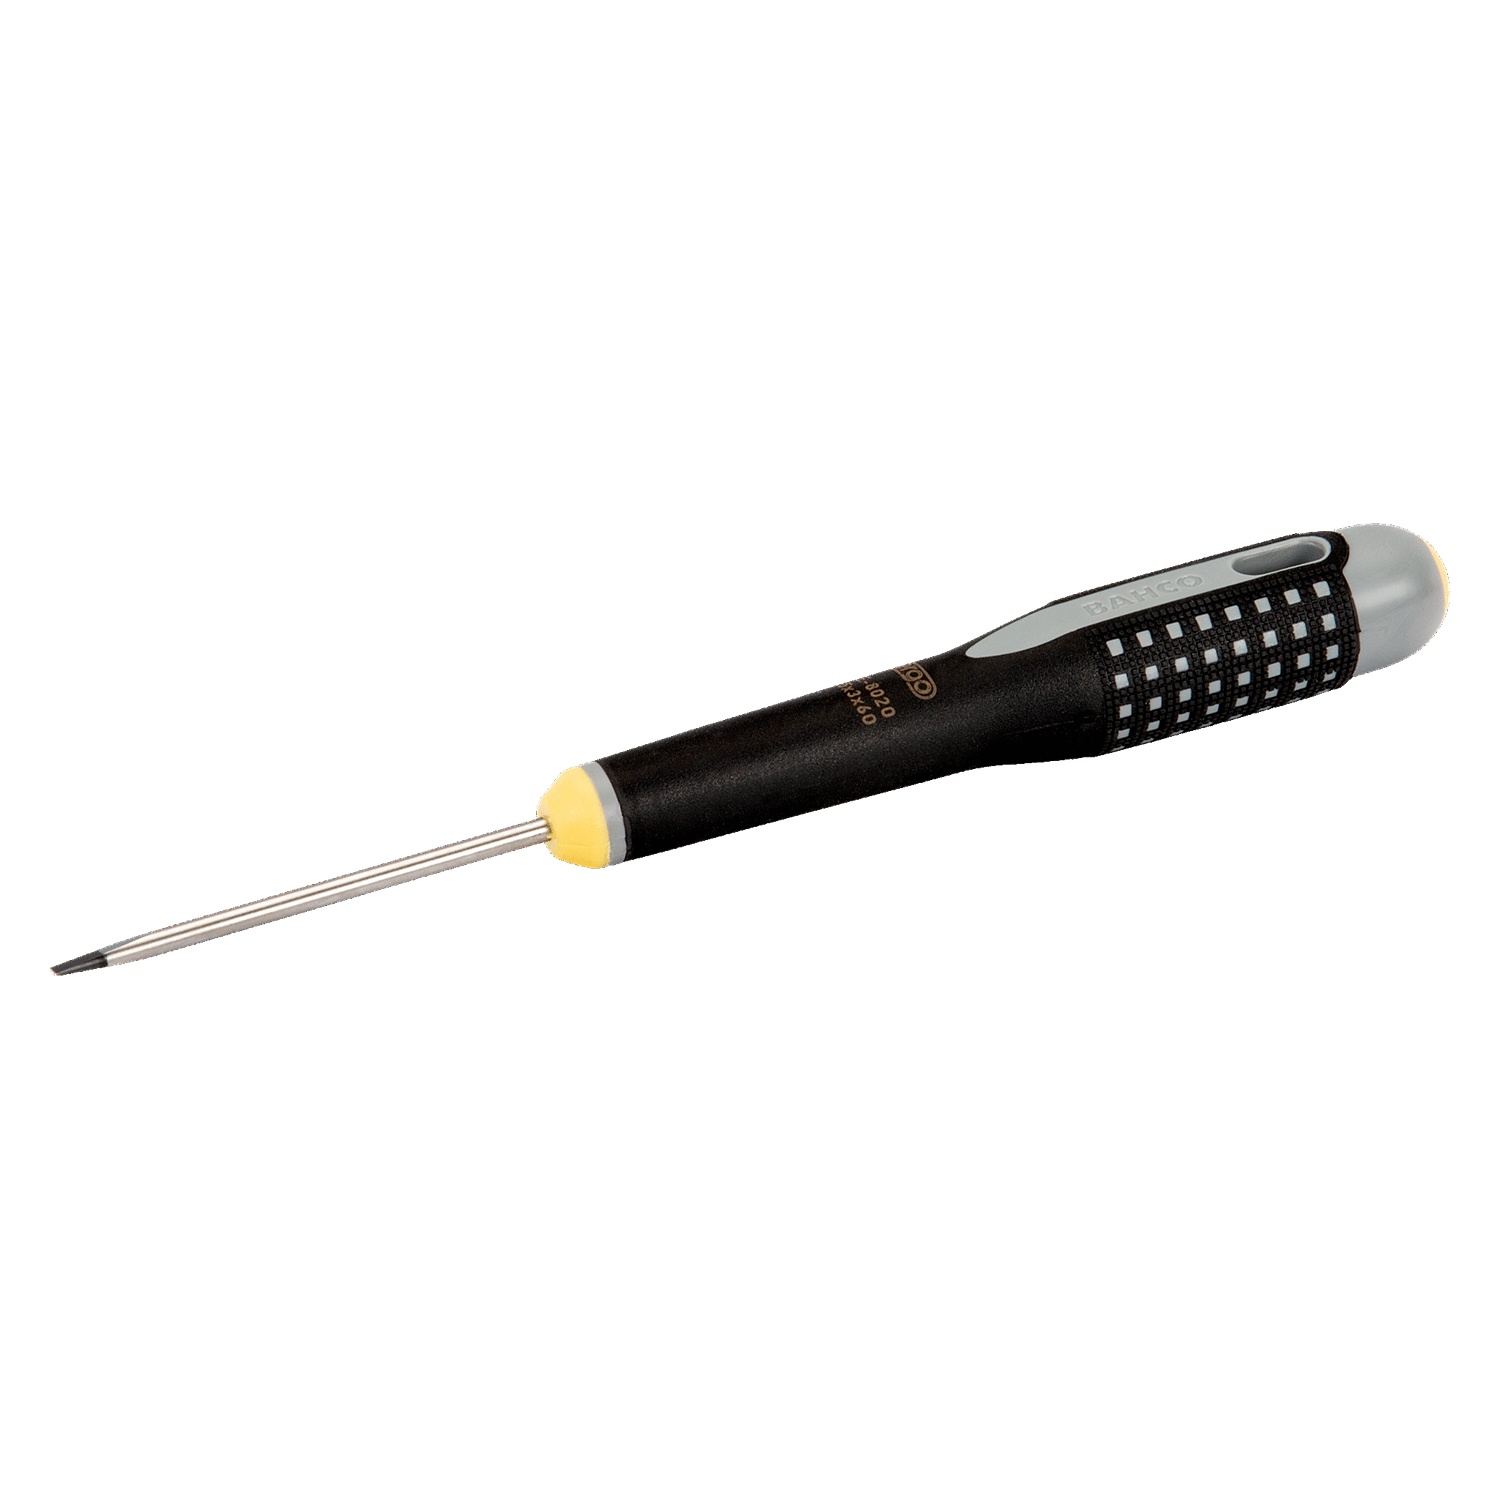 BAHCO BE-8010 BE-8252 ERGO Slotted Straight Tipped Screwdriver - Premium Straight Tipped Screwdriver from BAHCO - Shop now at Yew Aik.